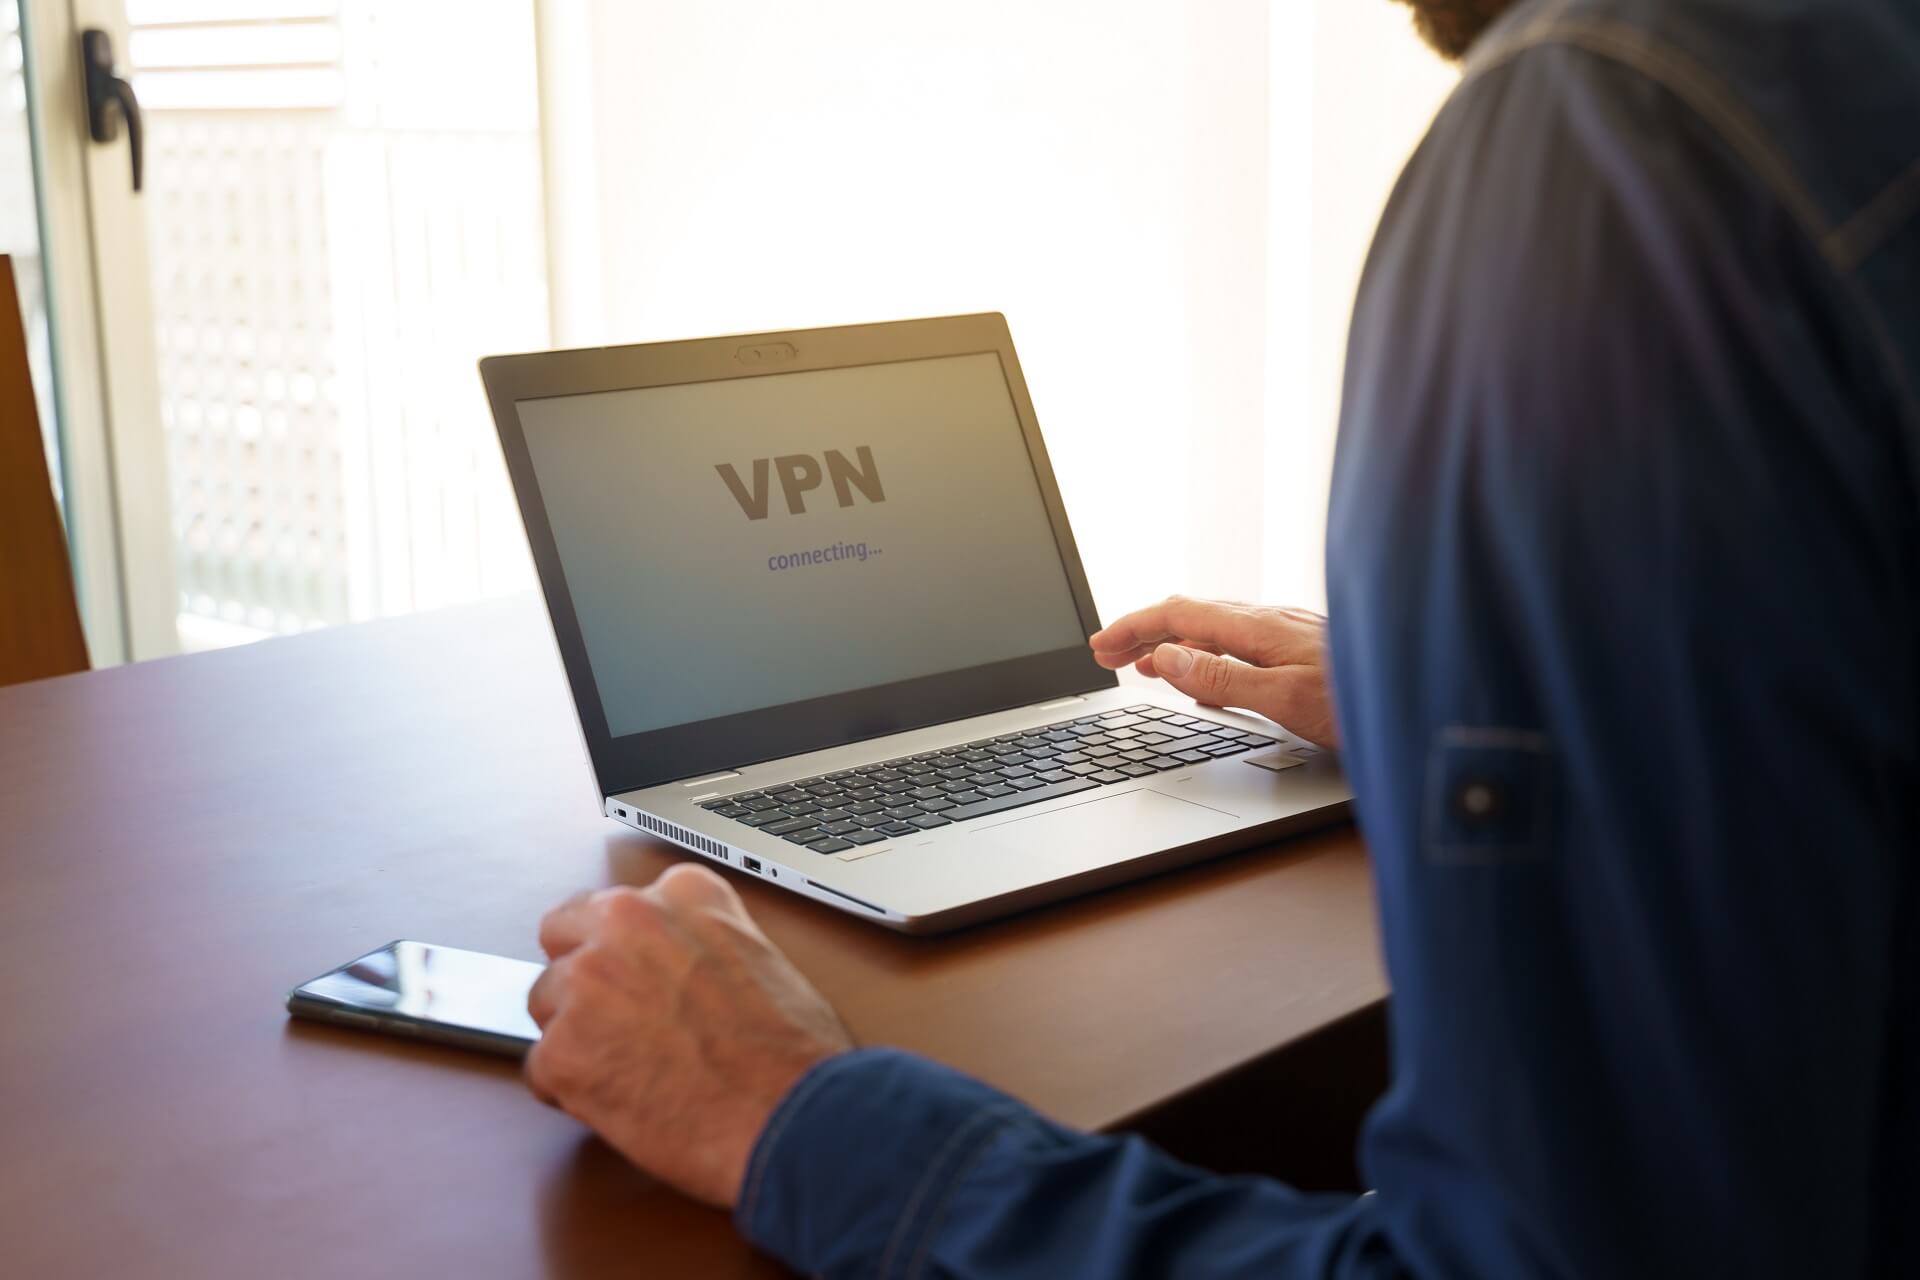 FIX: Windows 10 VPN error 789 connection failed due to security issues